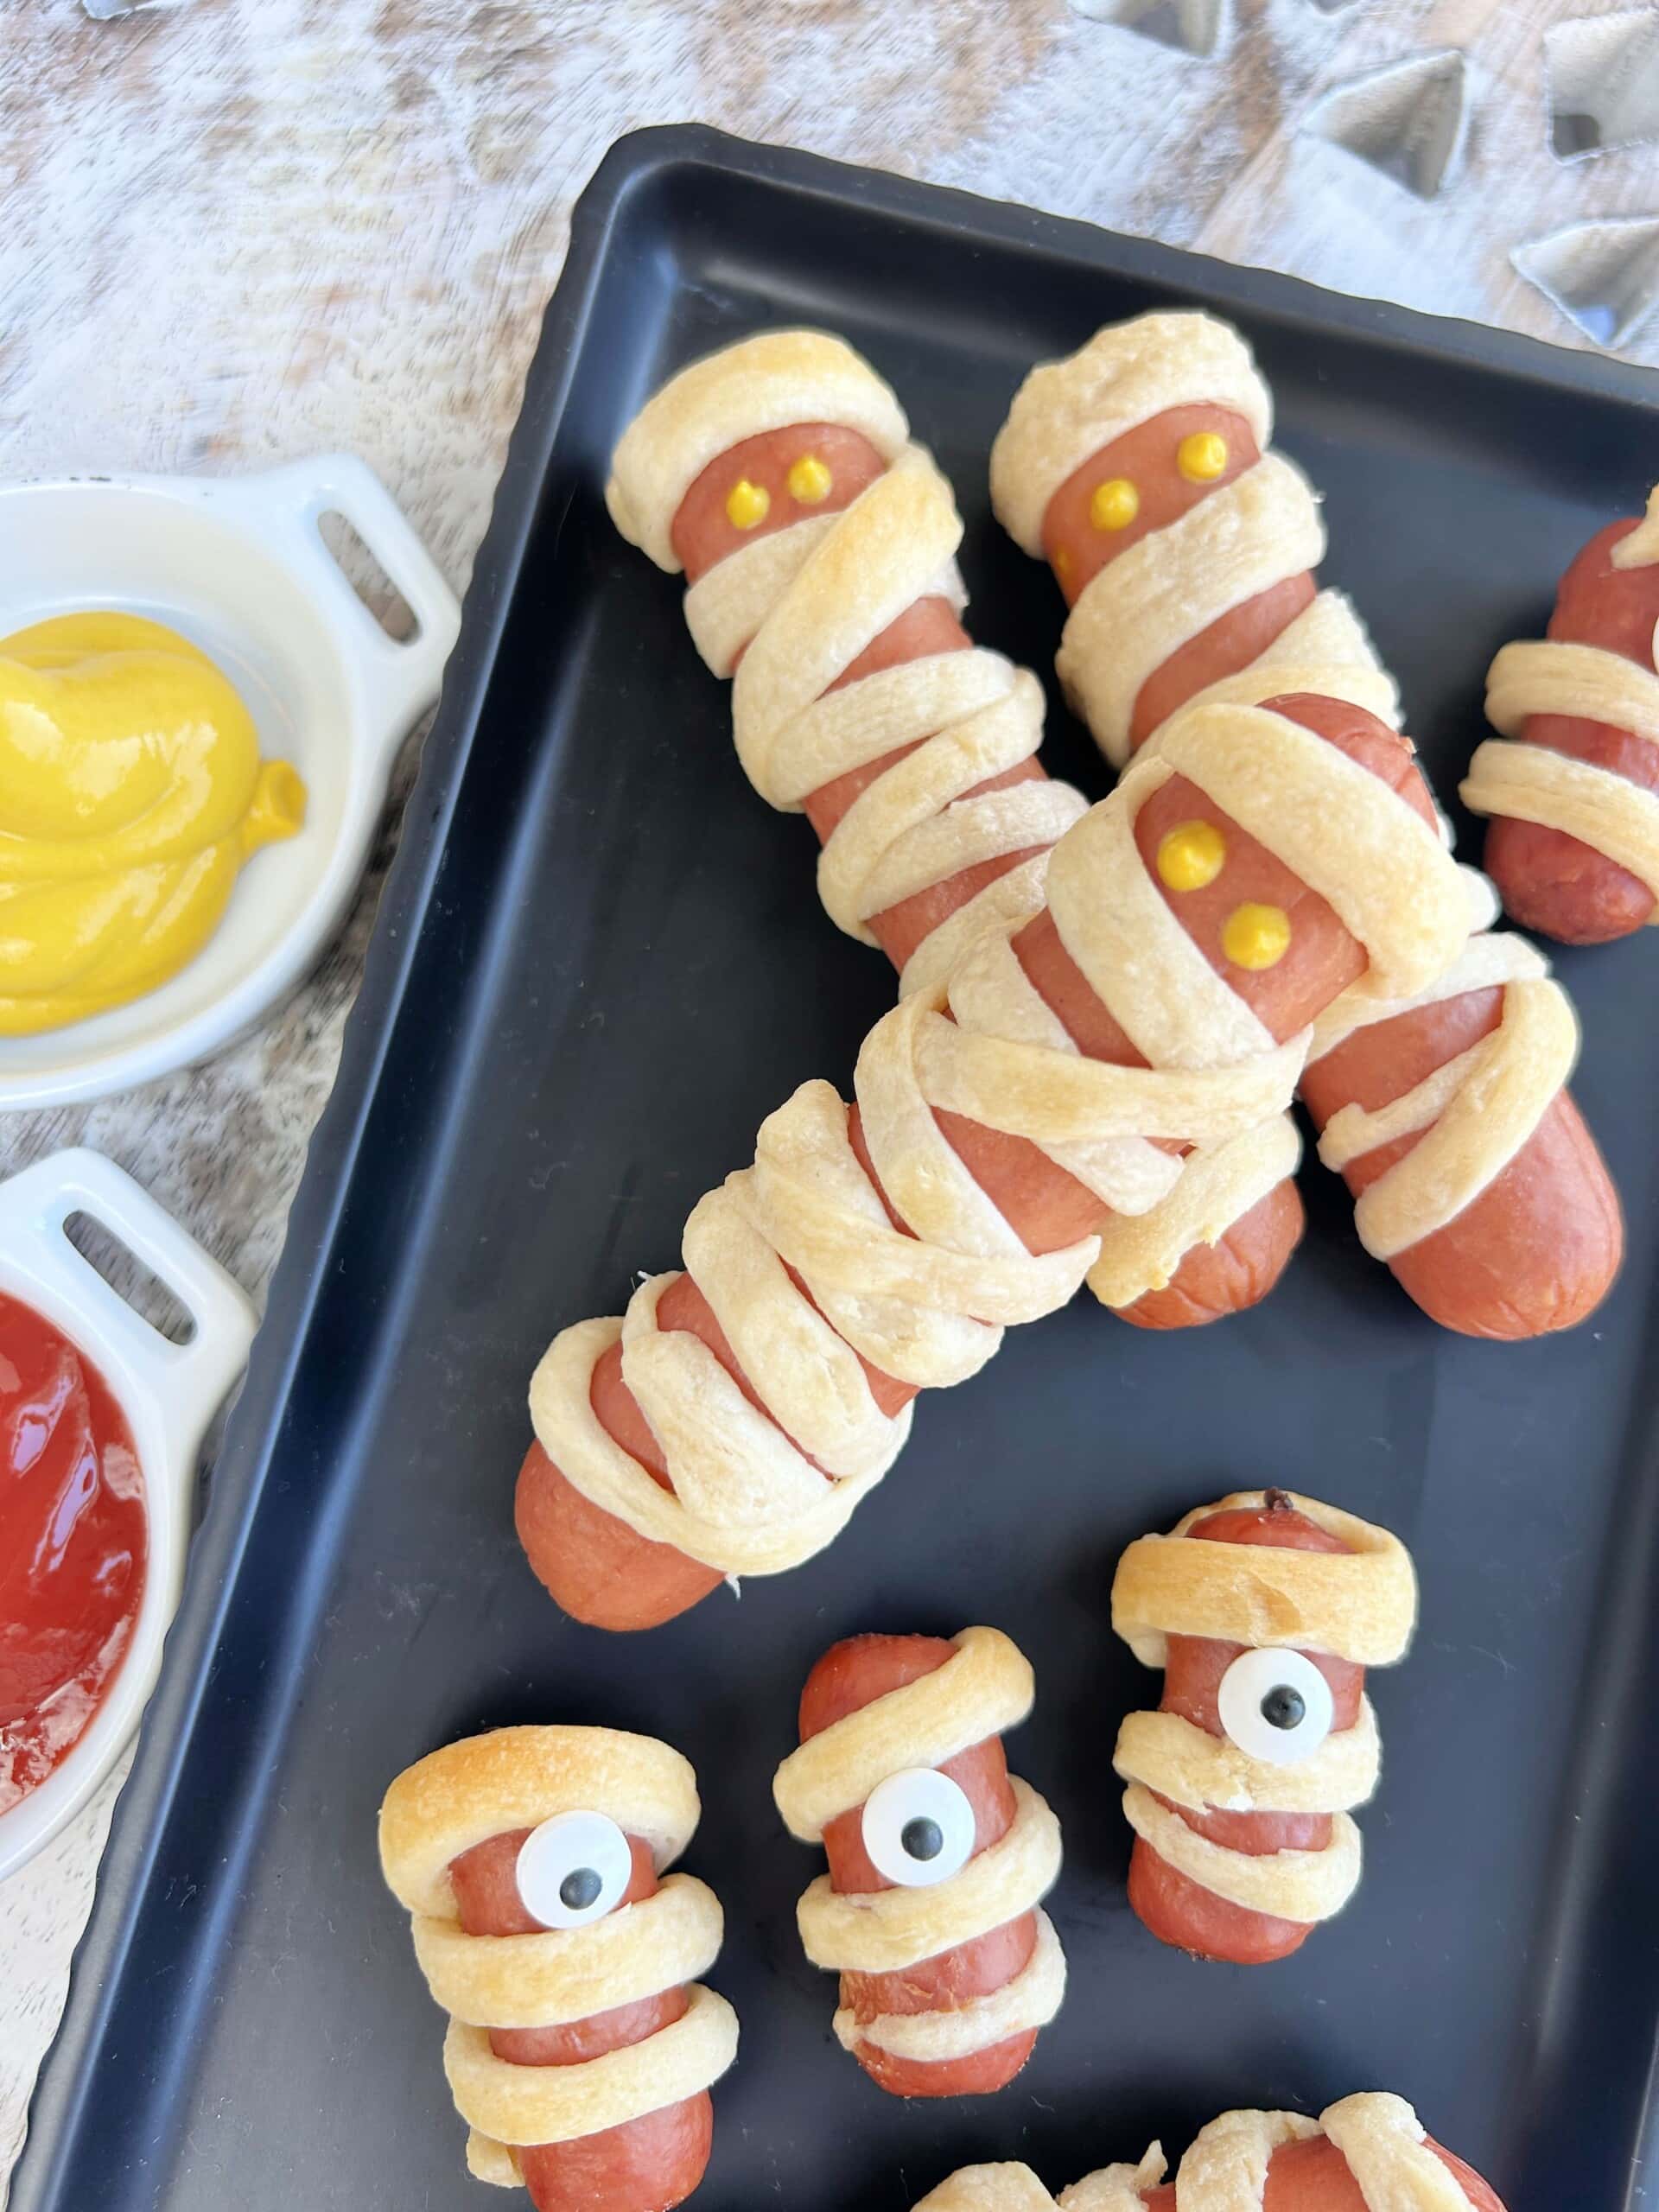 Mummy Dogs on platter with ketchup and mustard